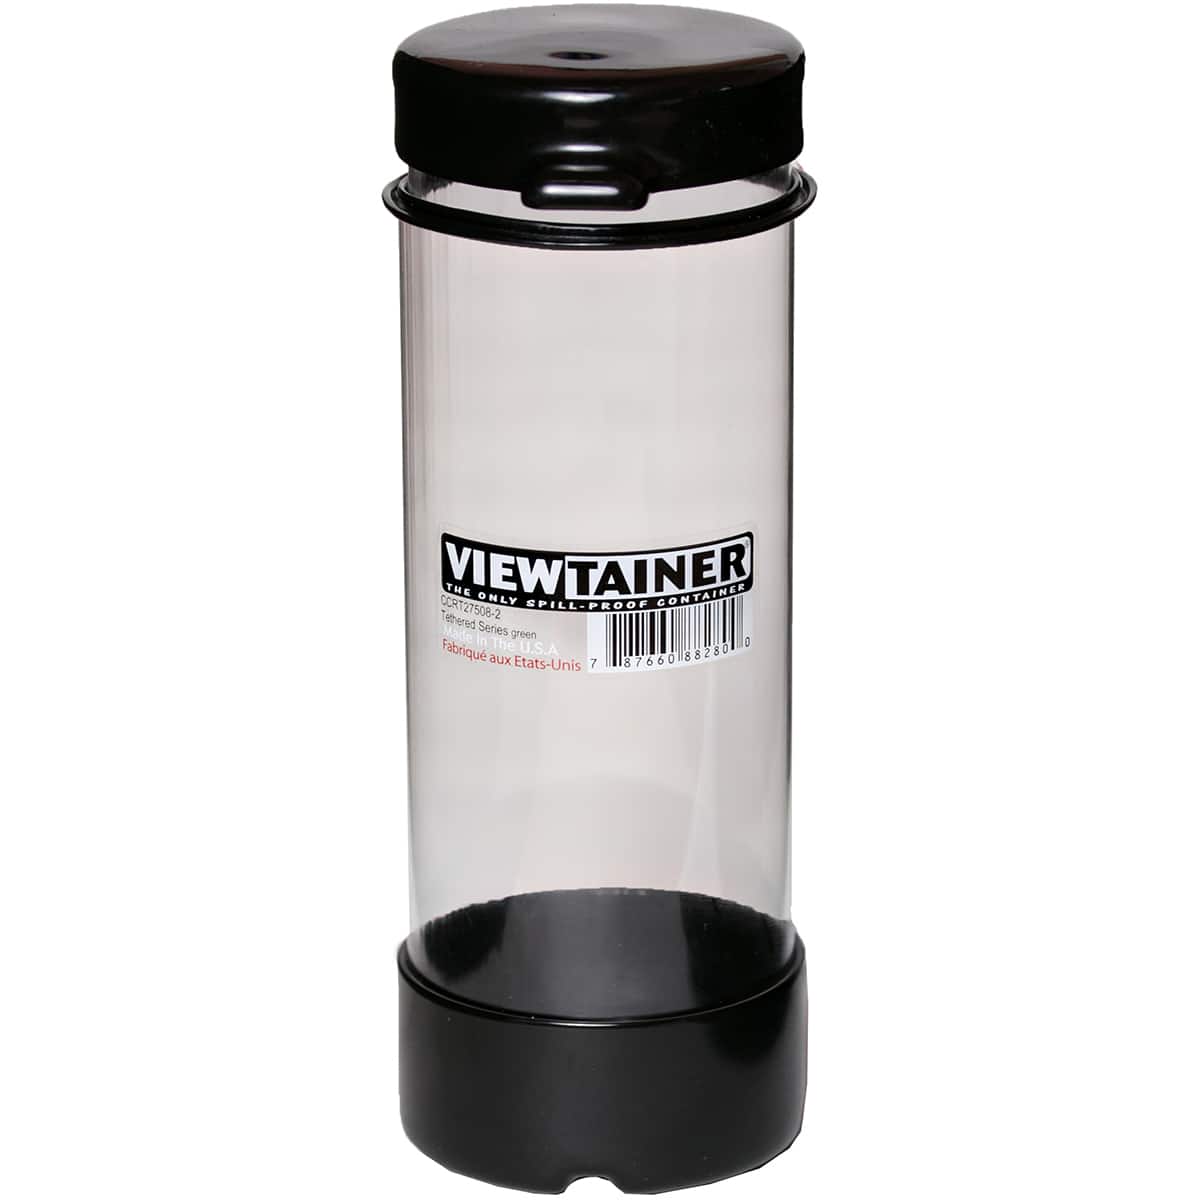 Viewtainer 8" Tethered Cap Storage Container